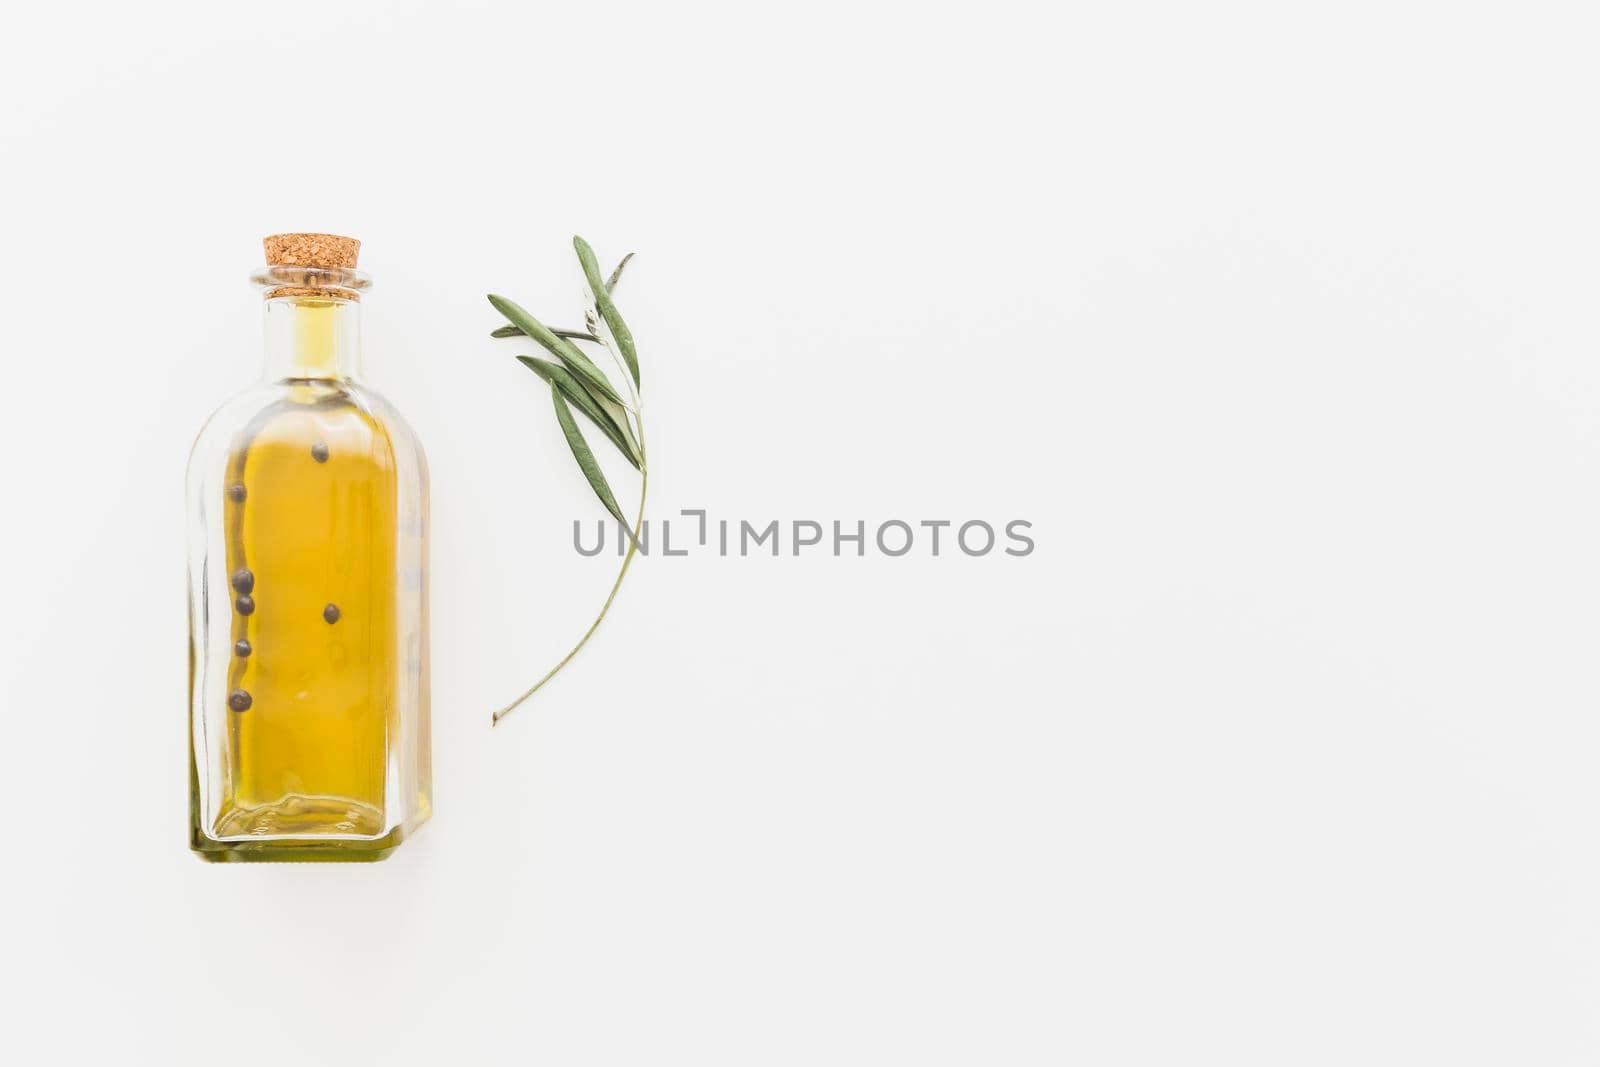 bottle oil with green branch